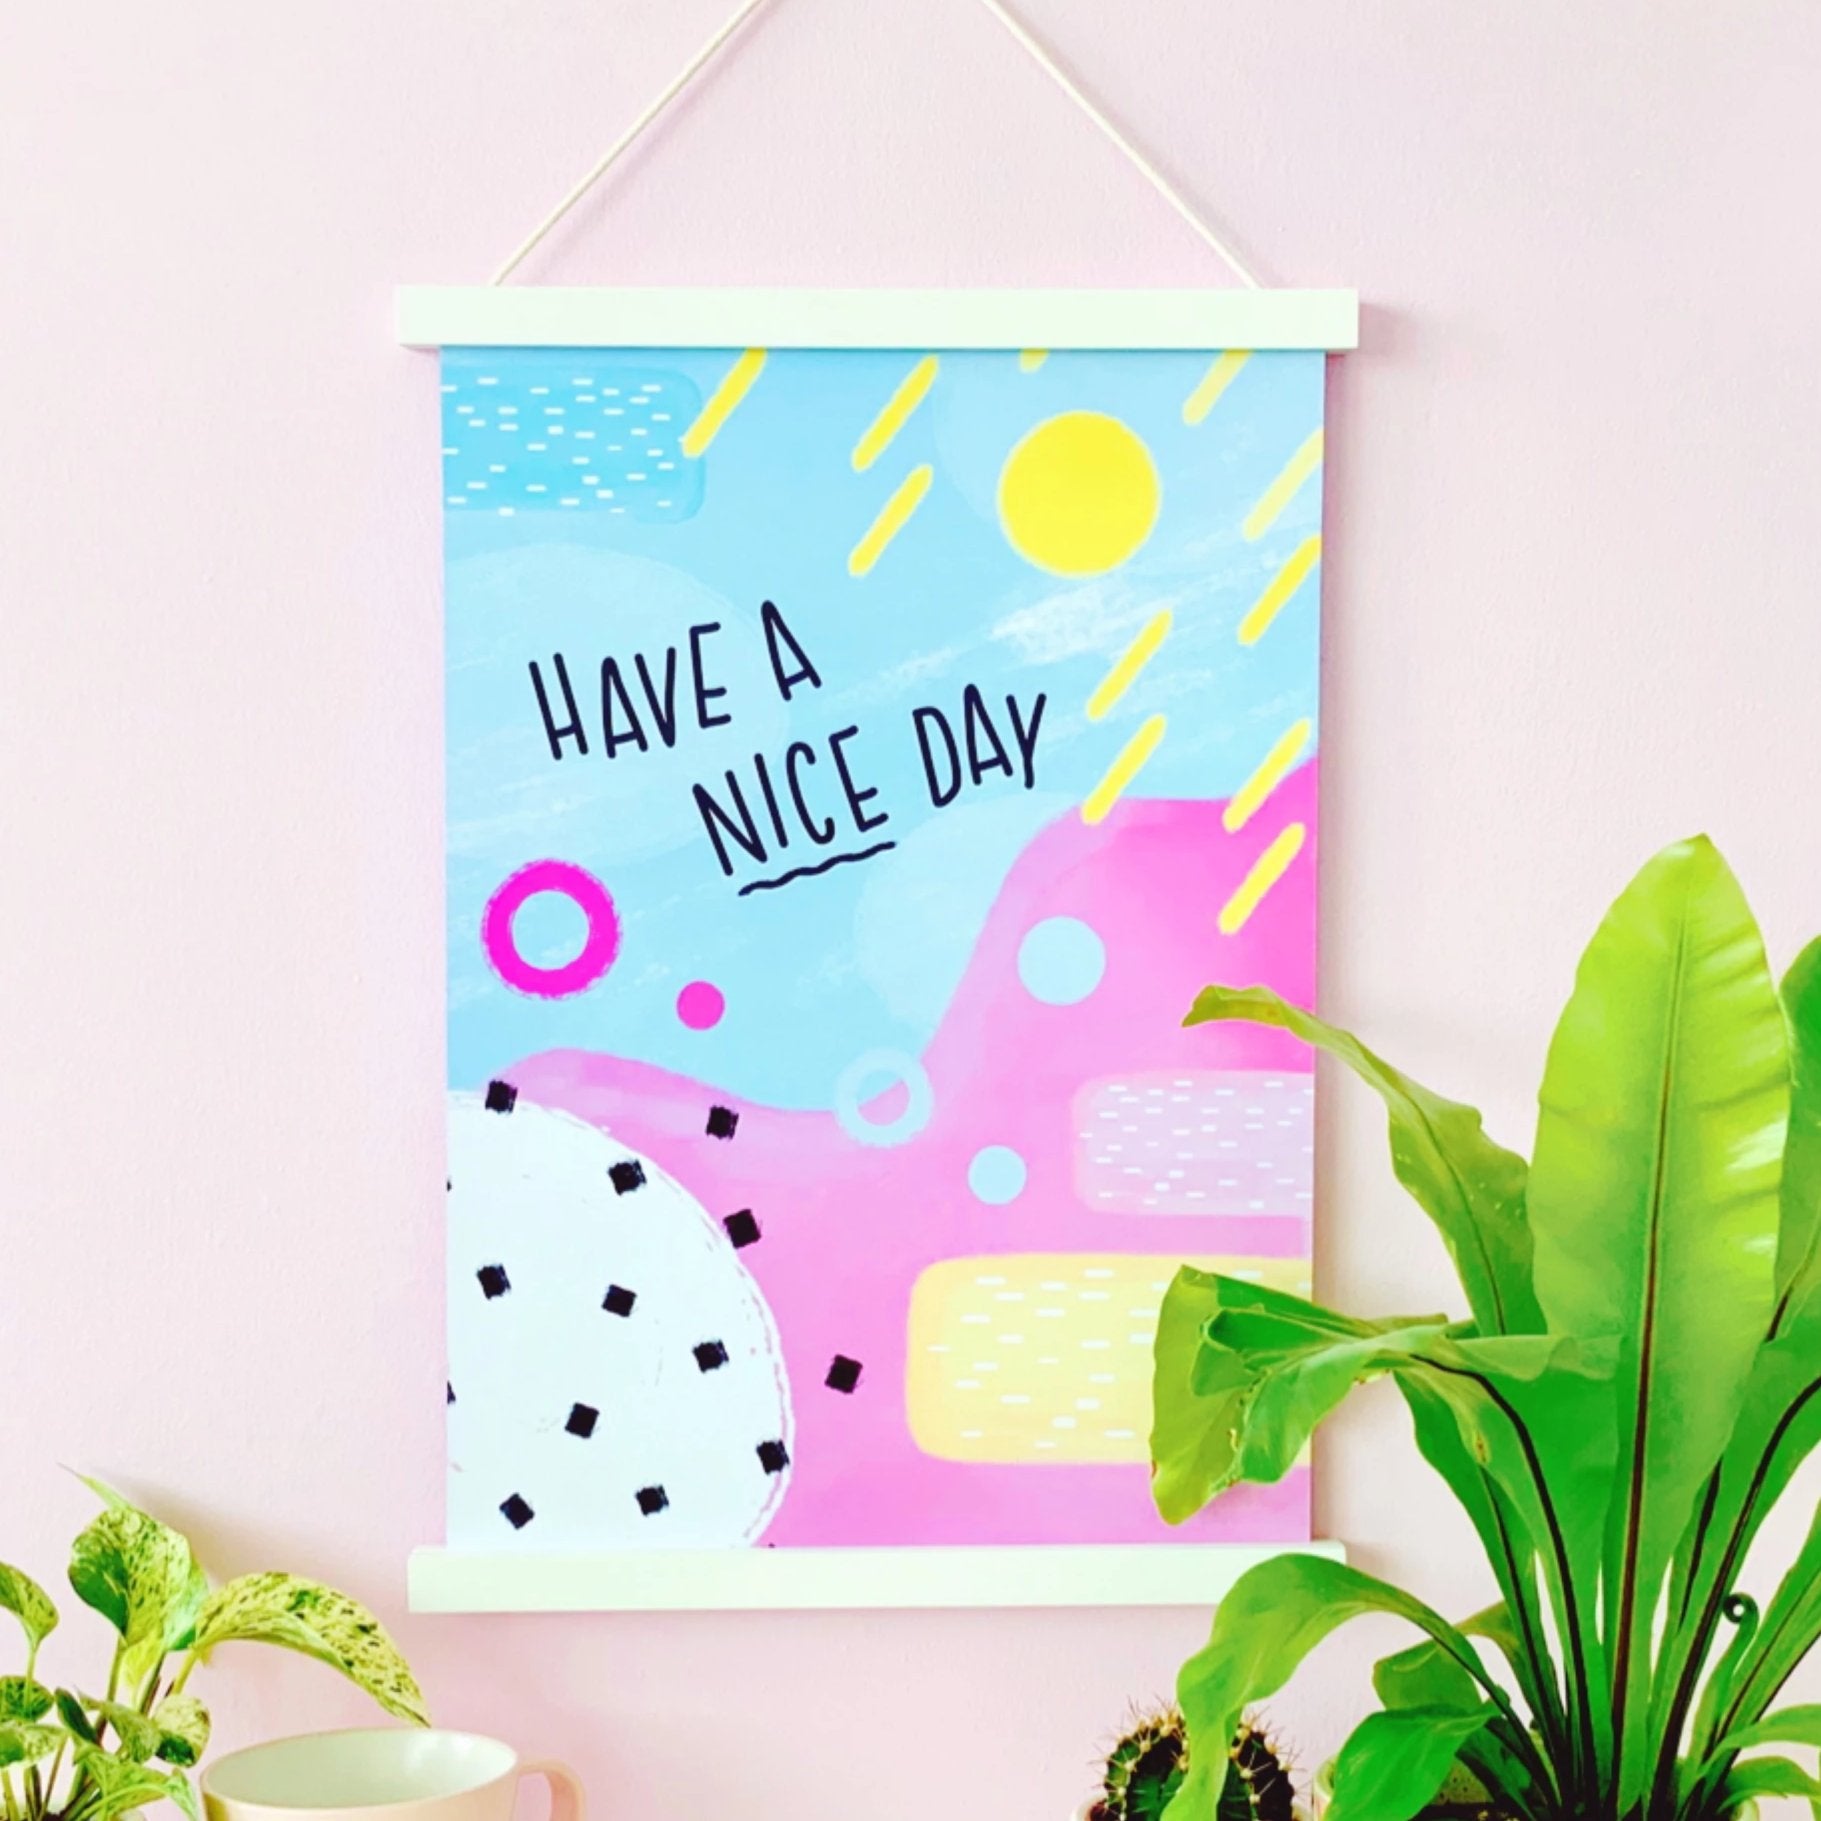 A brightly coloured art print placed on a pastel pink wall, surrounded by lush green plants in brightly coloured plant pots. The art print consists of abstract shapes and brightly coloured blues, pinks and yellows. There's a quote in a handwritten font saying 'have a nice day'.